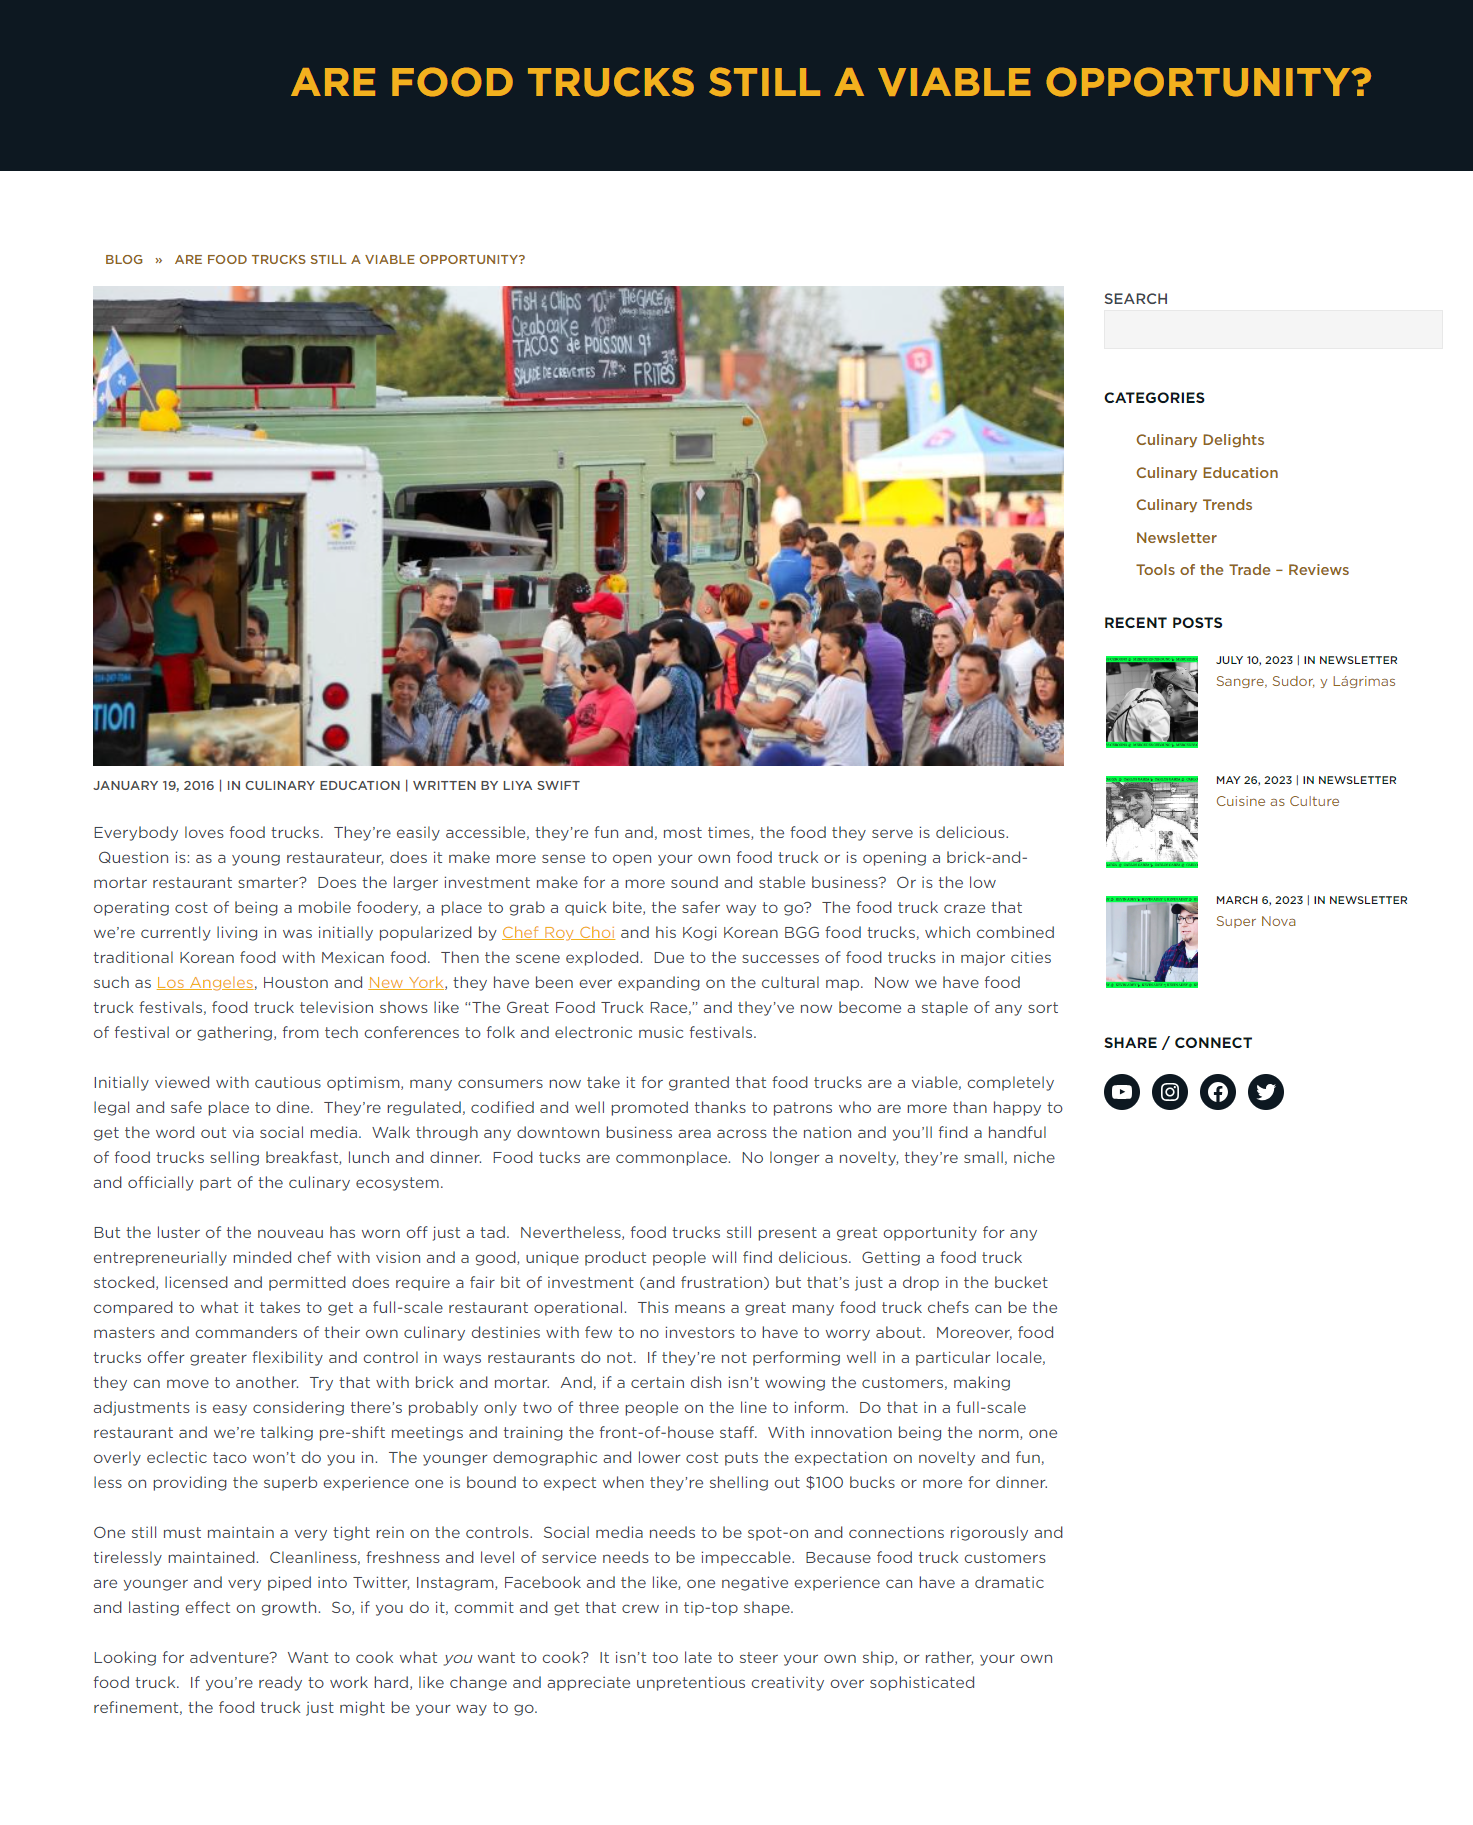 blog-are-food-trucks-still-a-viable-opportunity